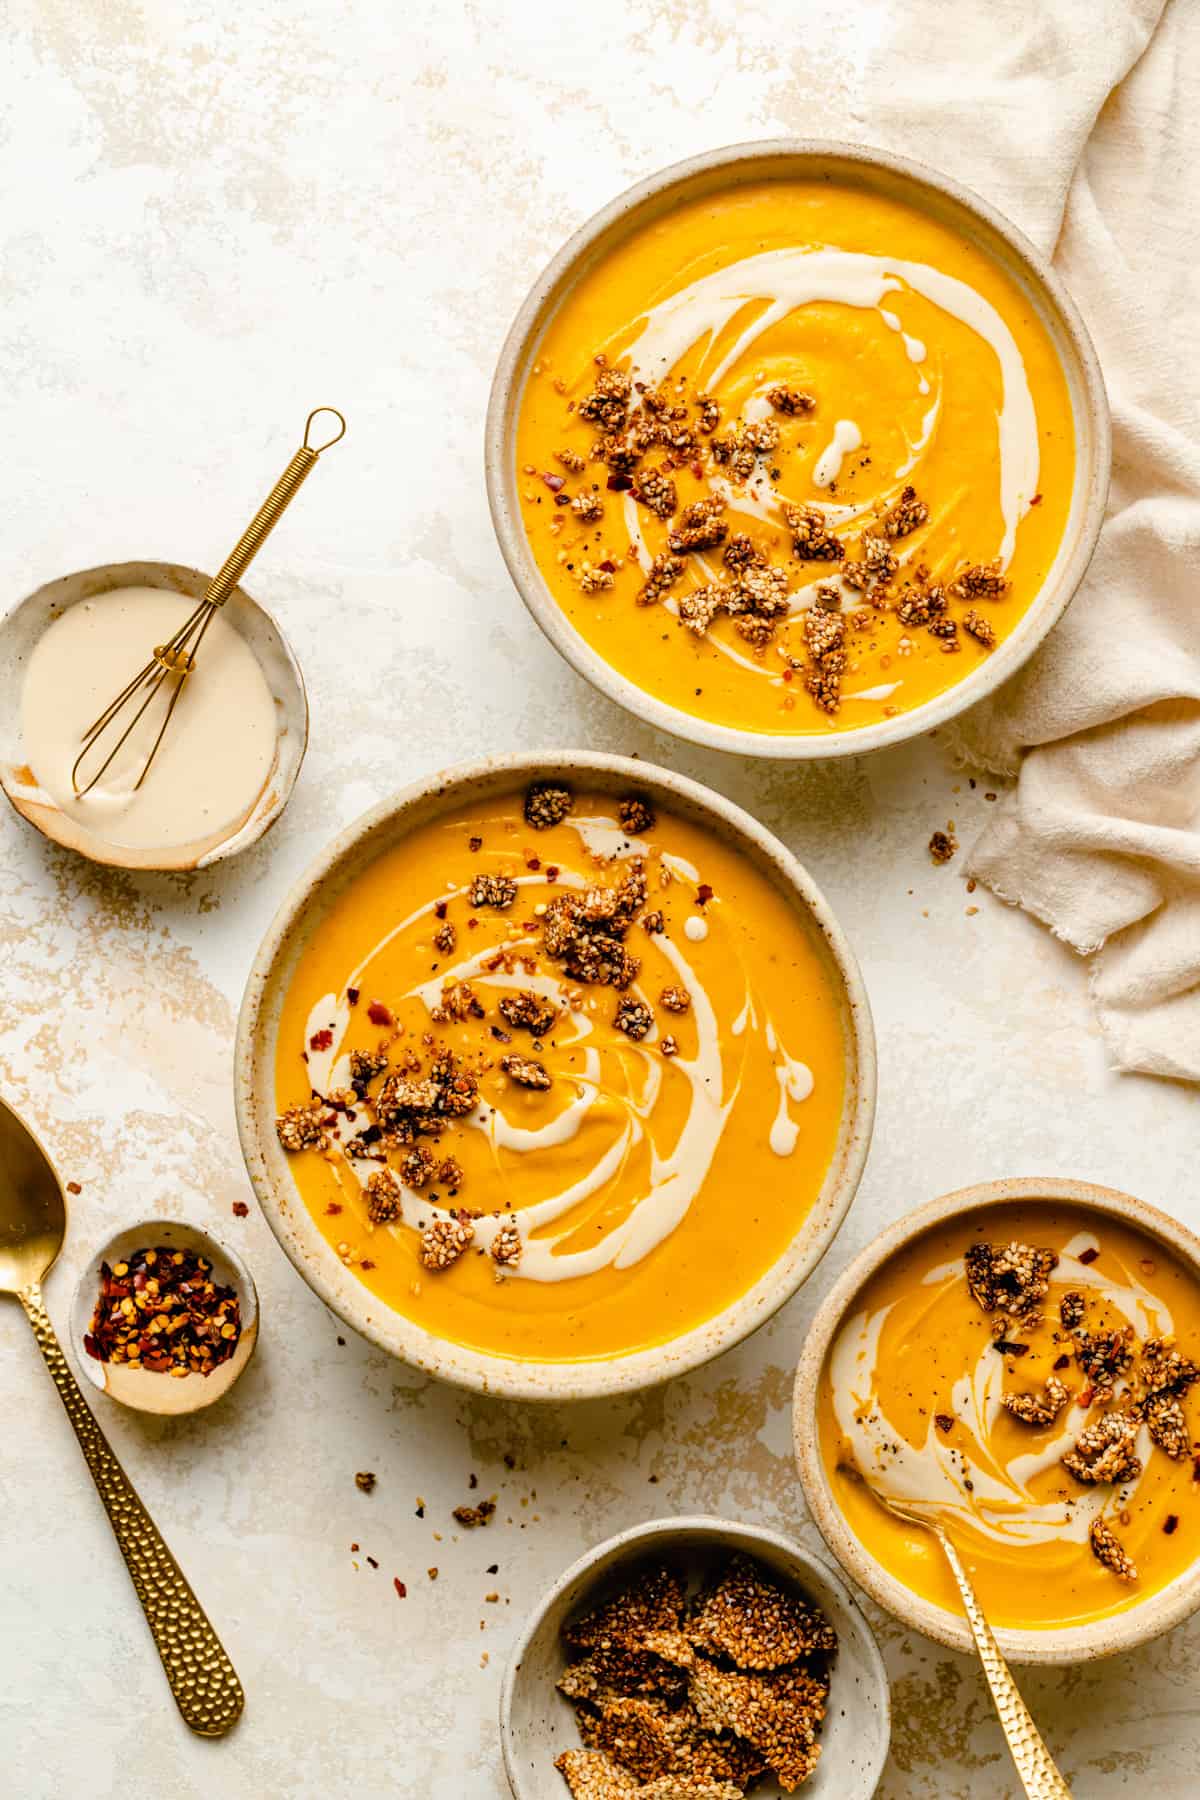 Various bowls of sweet potato soup with gold spoons and side dishes of sesame brittle, chilli flakes and tahini drizzle.